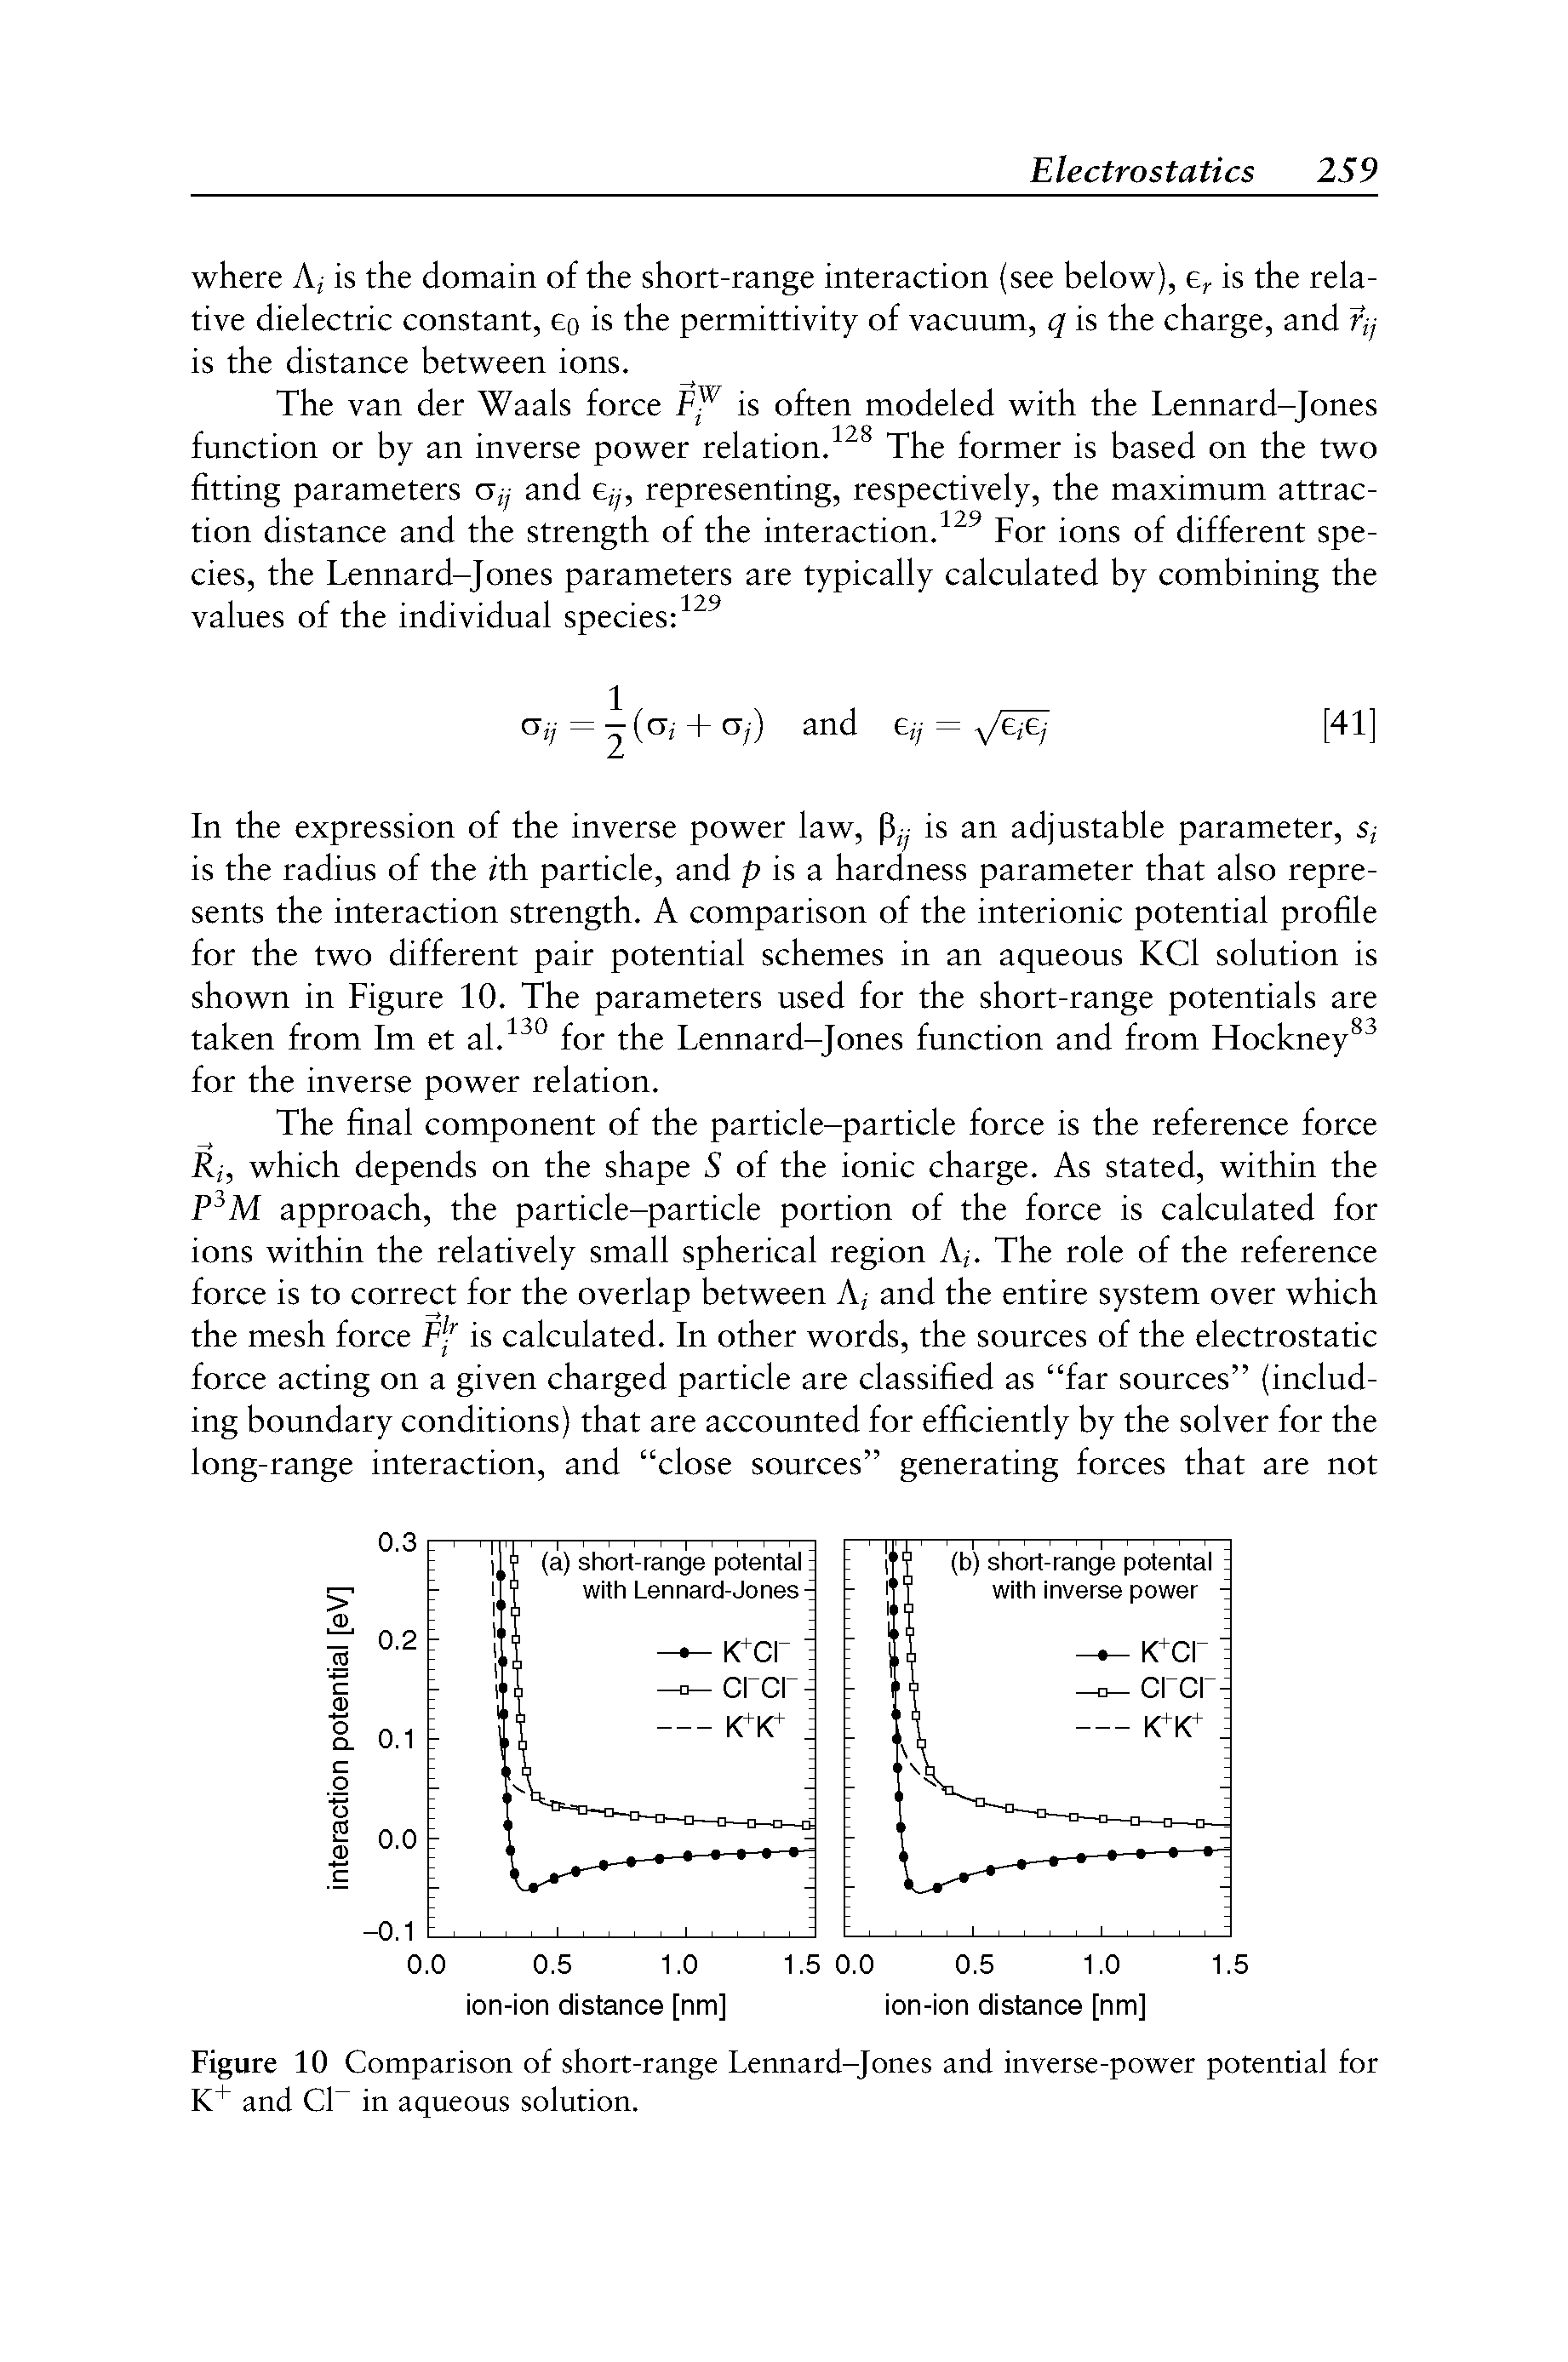 Figure 10 Comparison of short-range Lennard-Jones and inverse-power potential for K+ and CC in aqueous solution.